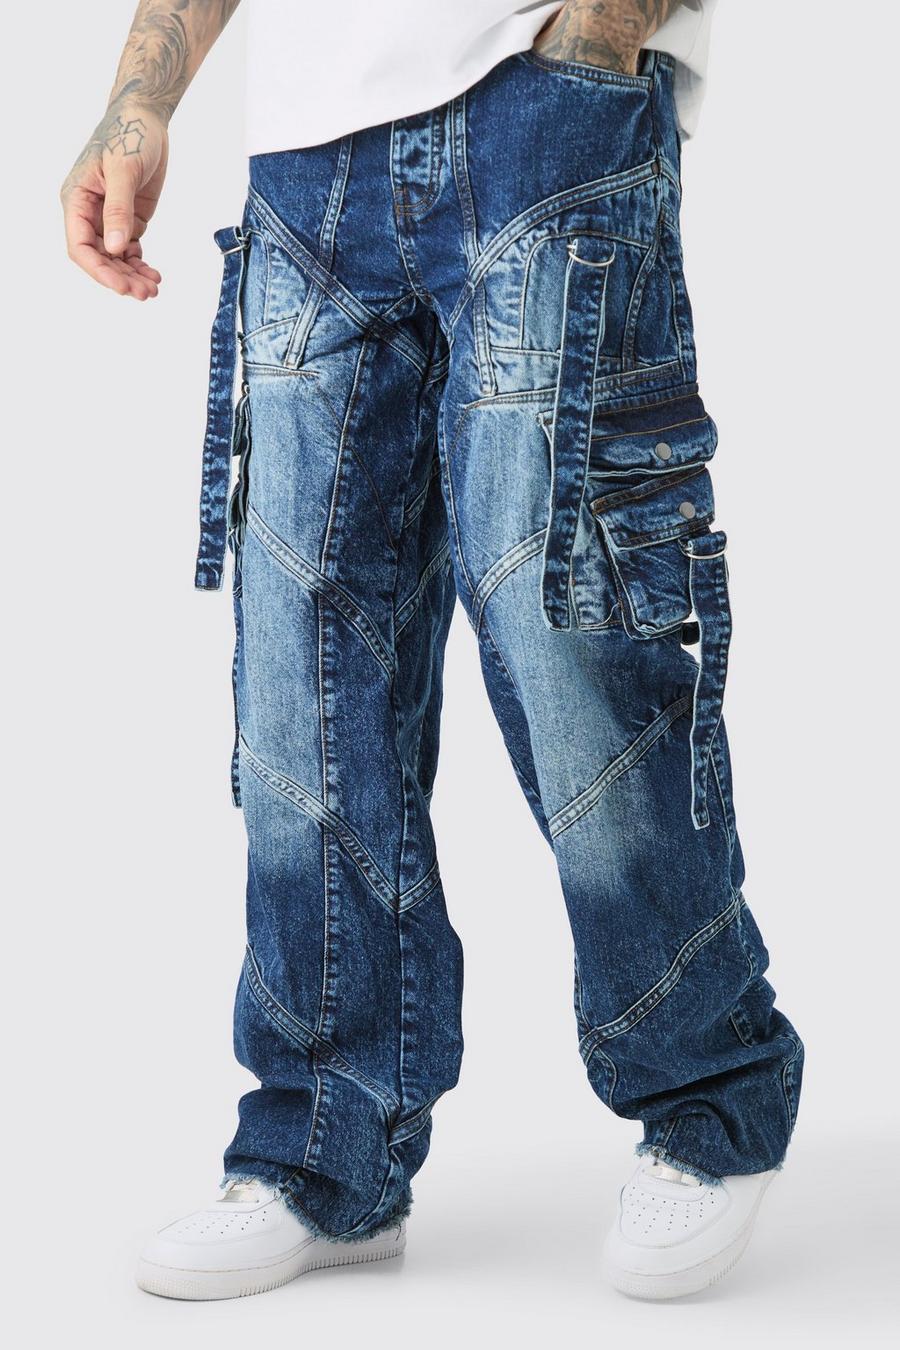 Indigo Tall Baggy Rigid Strap And Buckle Detail Jeans